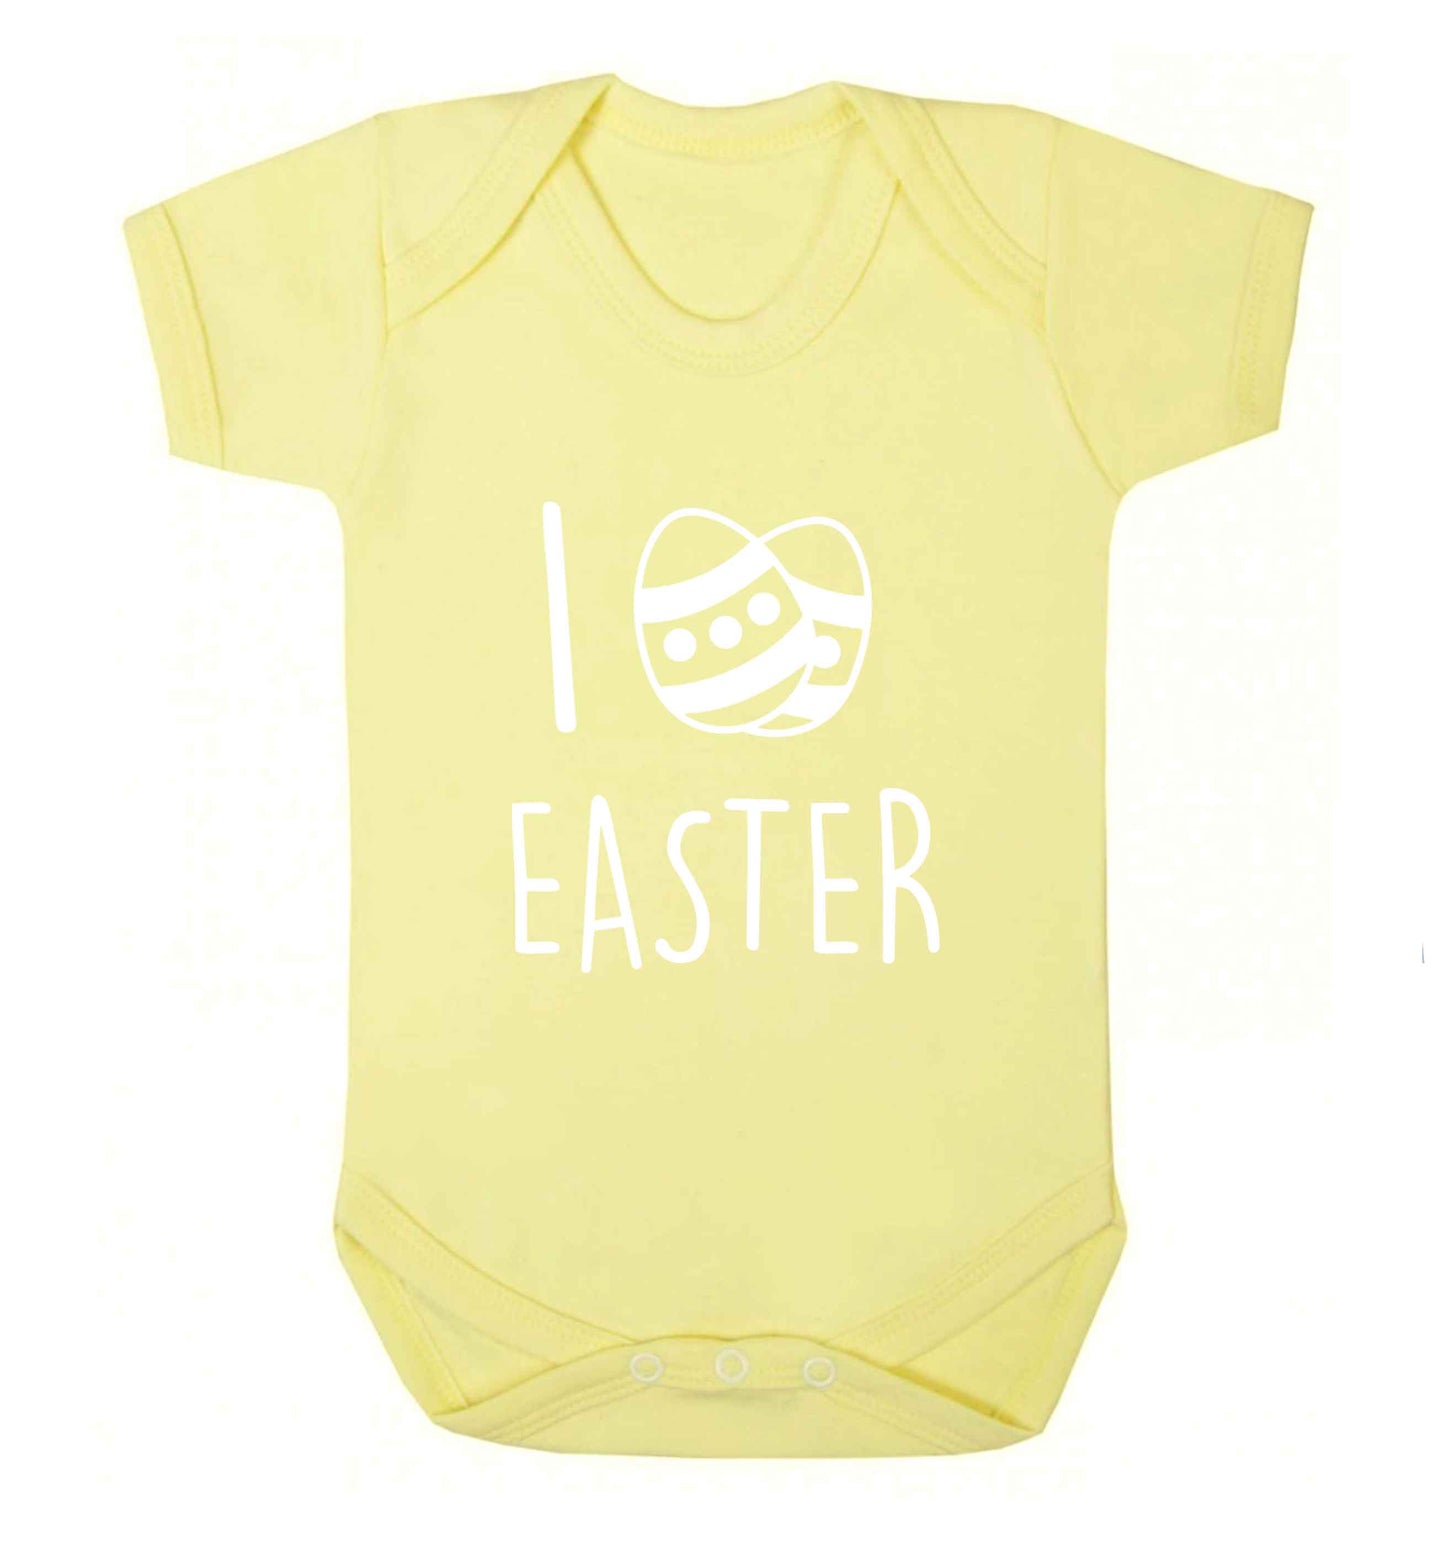 I love Easter baby vest pale yellow 18-24 months